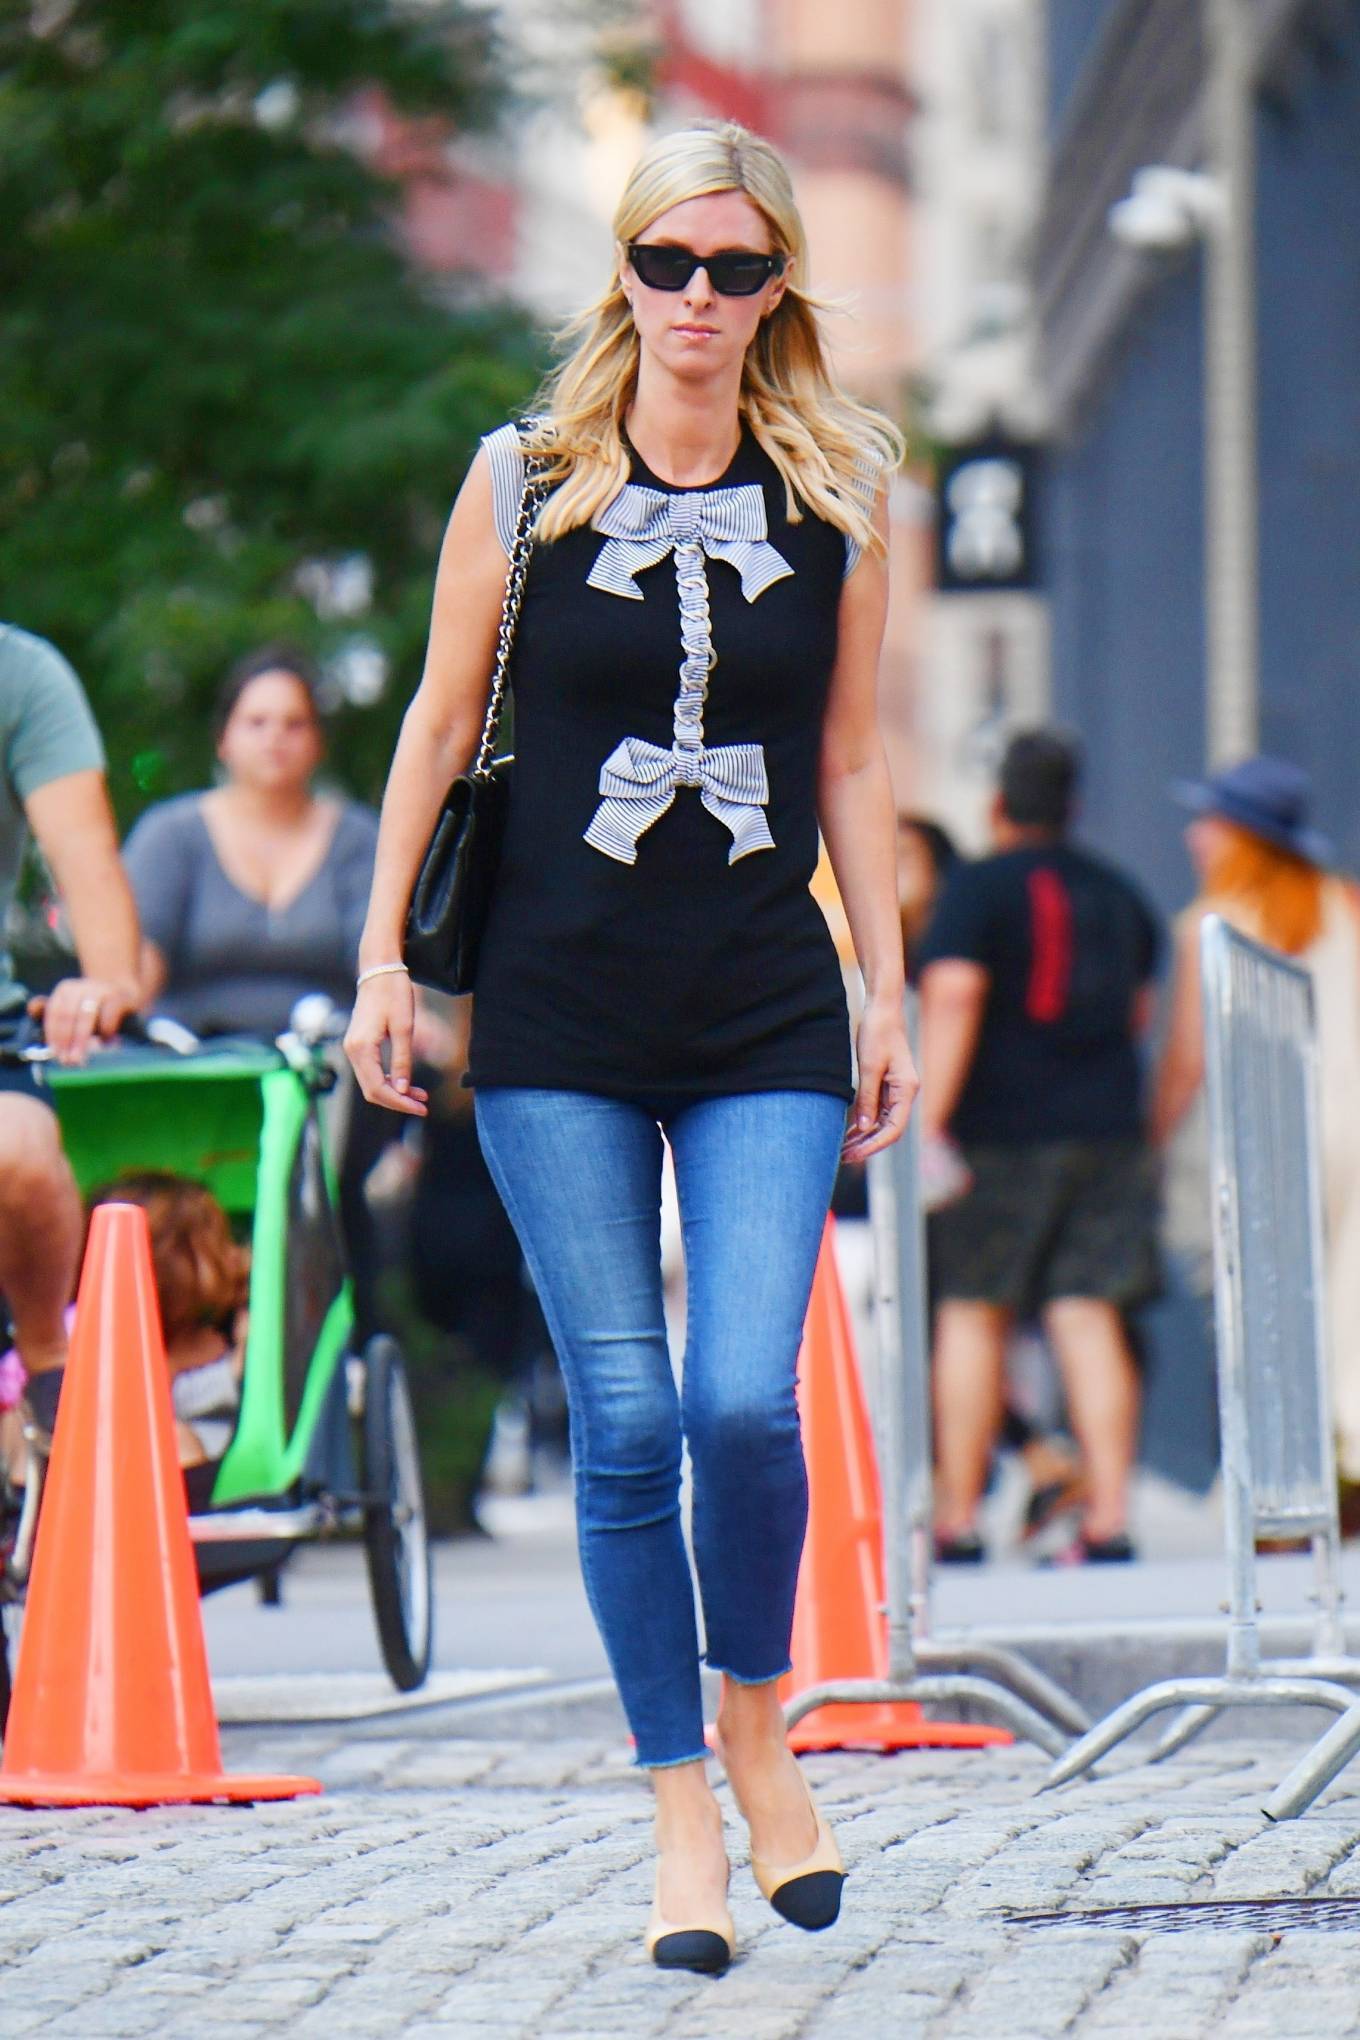 Nicky Hilton Rothschild - Steps out in another stylish ensemble over the weekend in SoHo